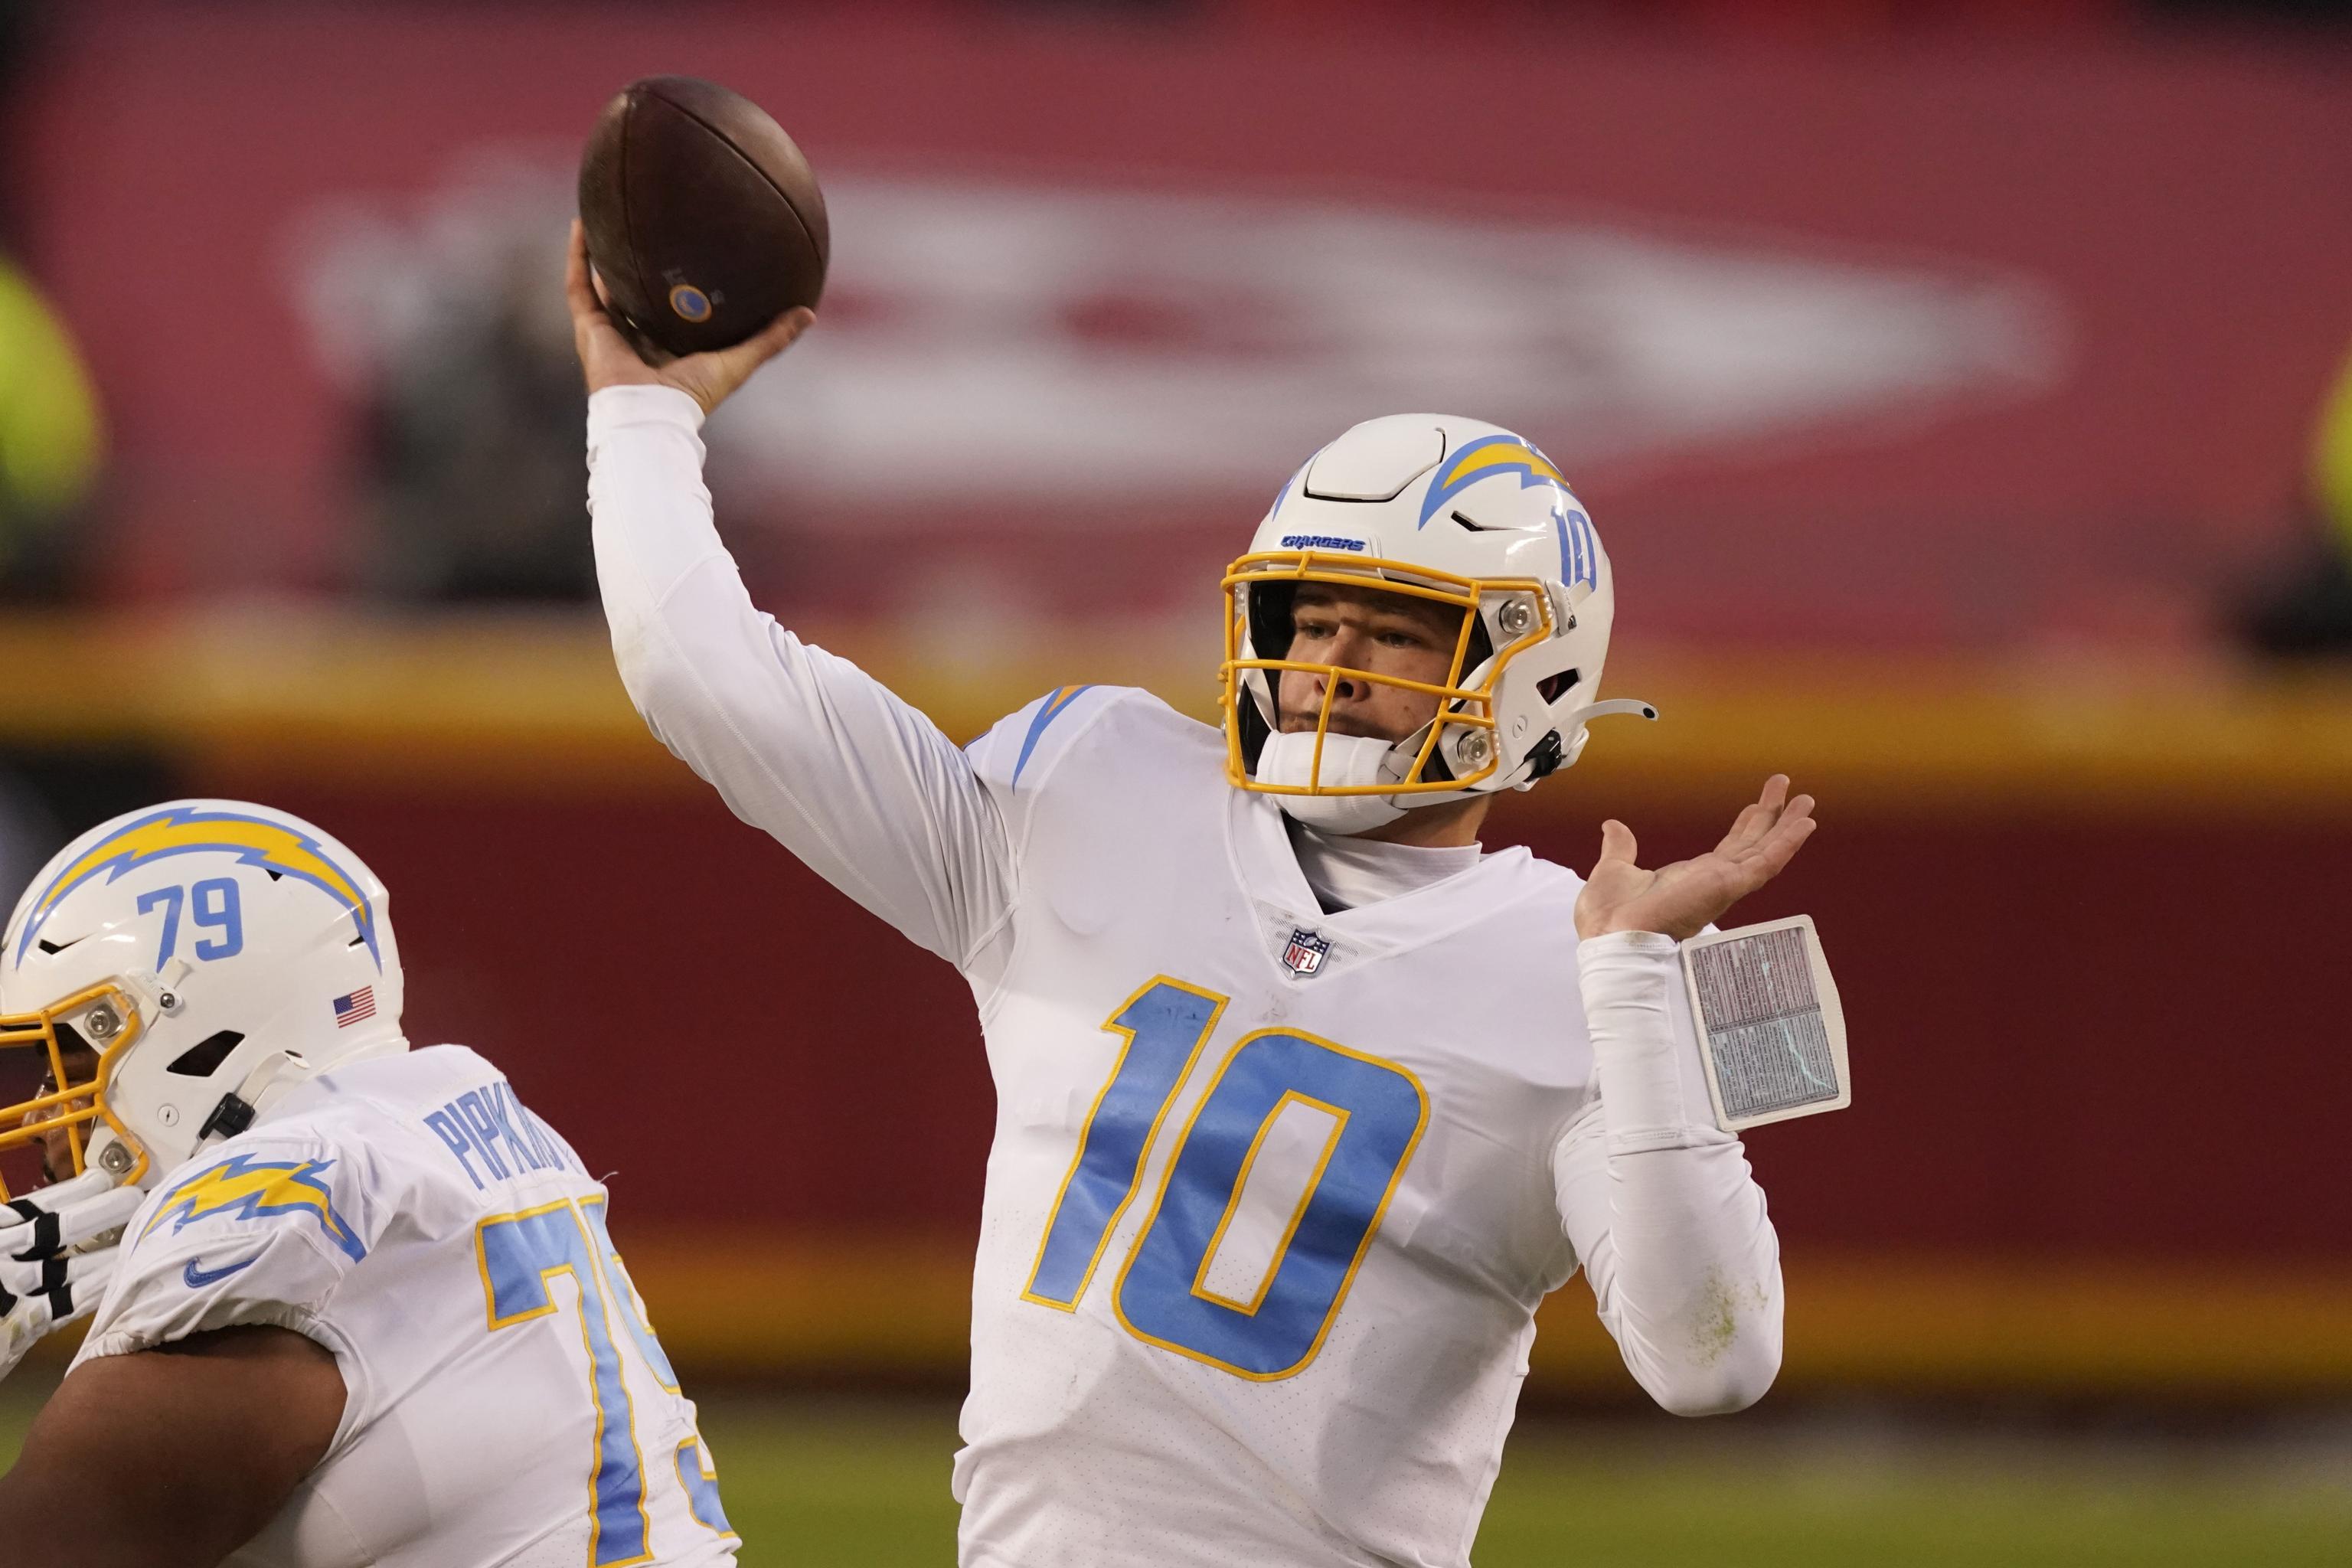 2021 NFL Preview: Justin Herbert's great rookie season changes the Chargers'  outlook